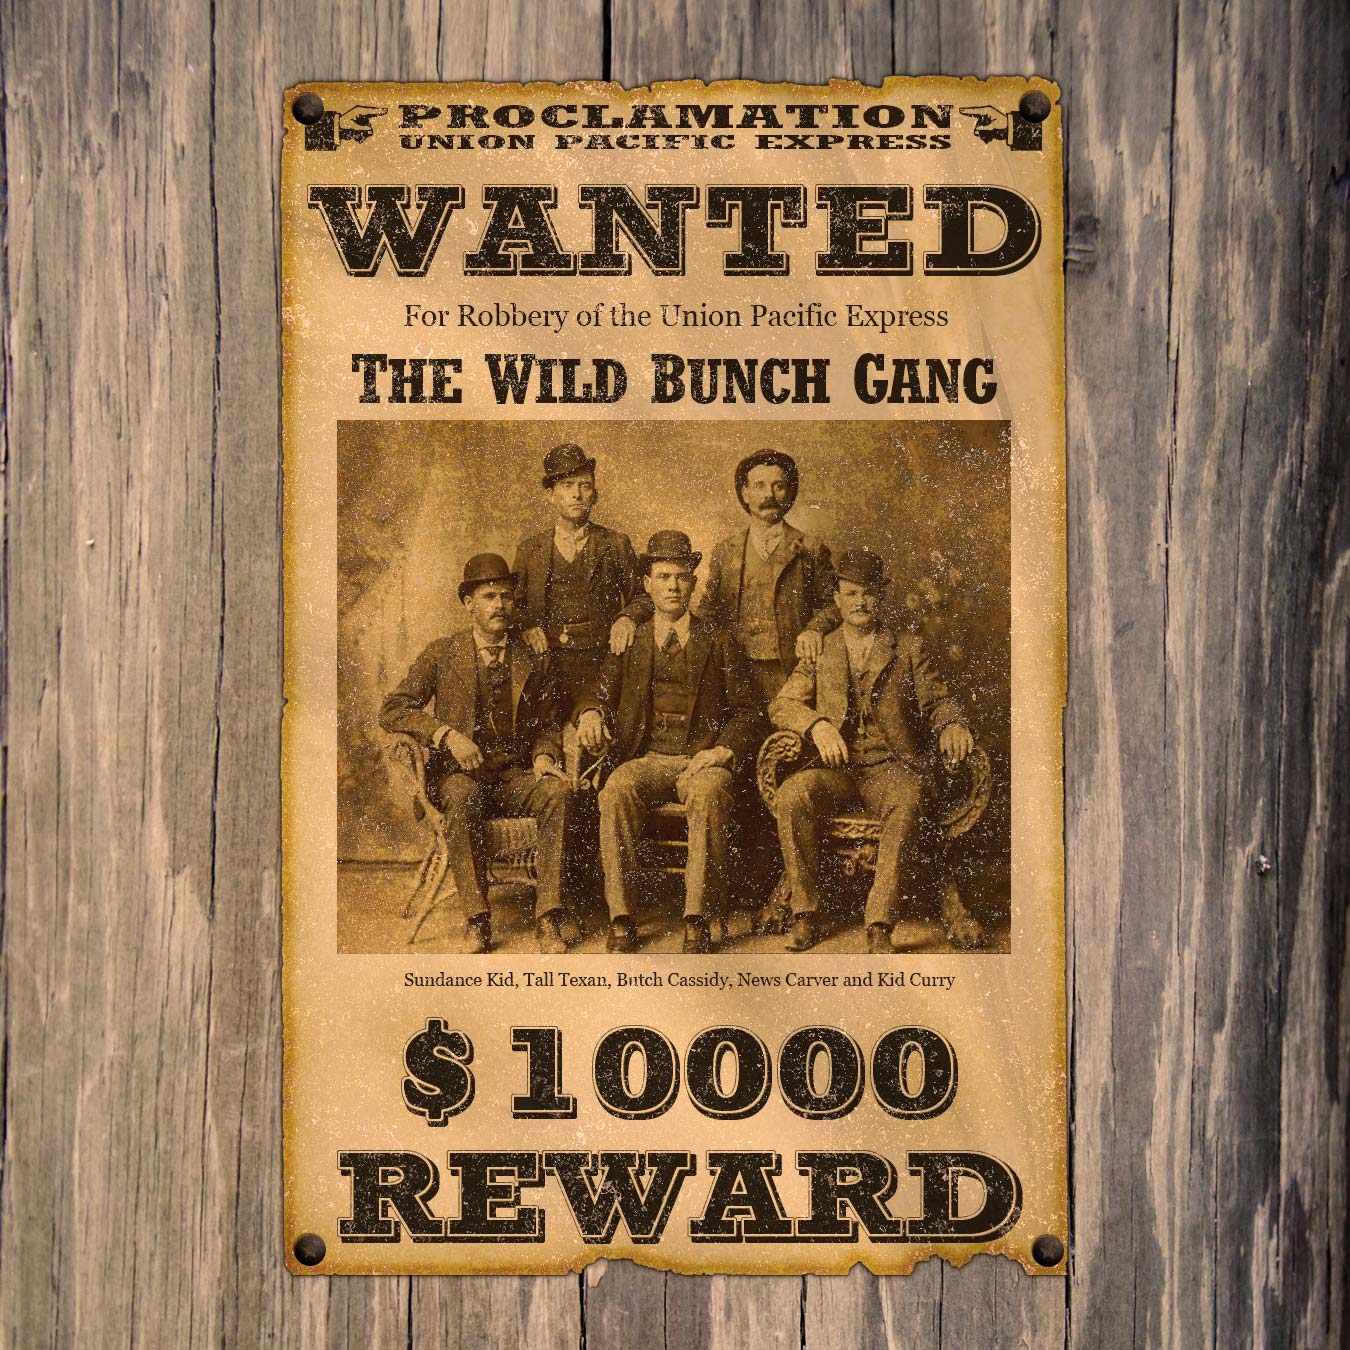 Create An Old West Wanted Poster In Adobe Photoshop - Free Printable Wanted Poster Old West